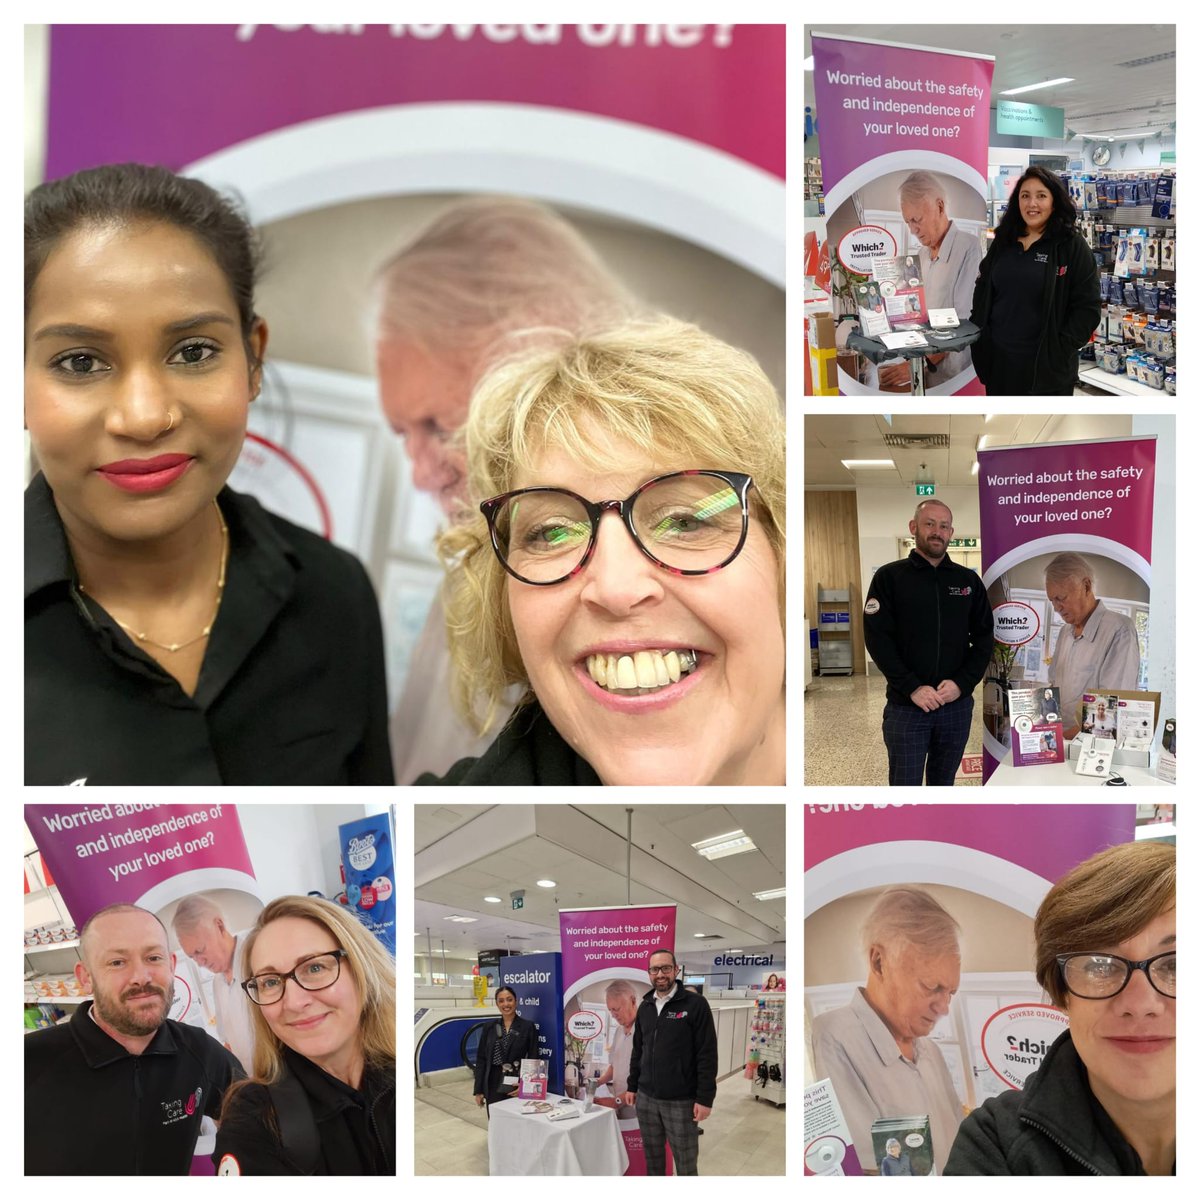 Super excited today to be at @bootsuk Over 60s Reward Events up and down the country! As an approved Boots partner, we couldn't wait to talk to their customers about how personal alarms can support safety and independence. Great effort from the whole team! #healthcare #ageing